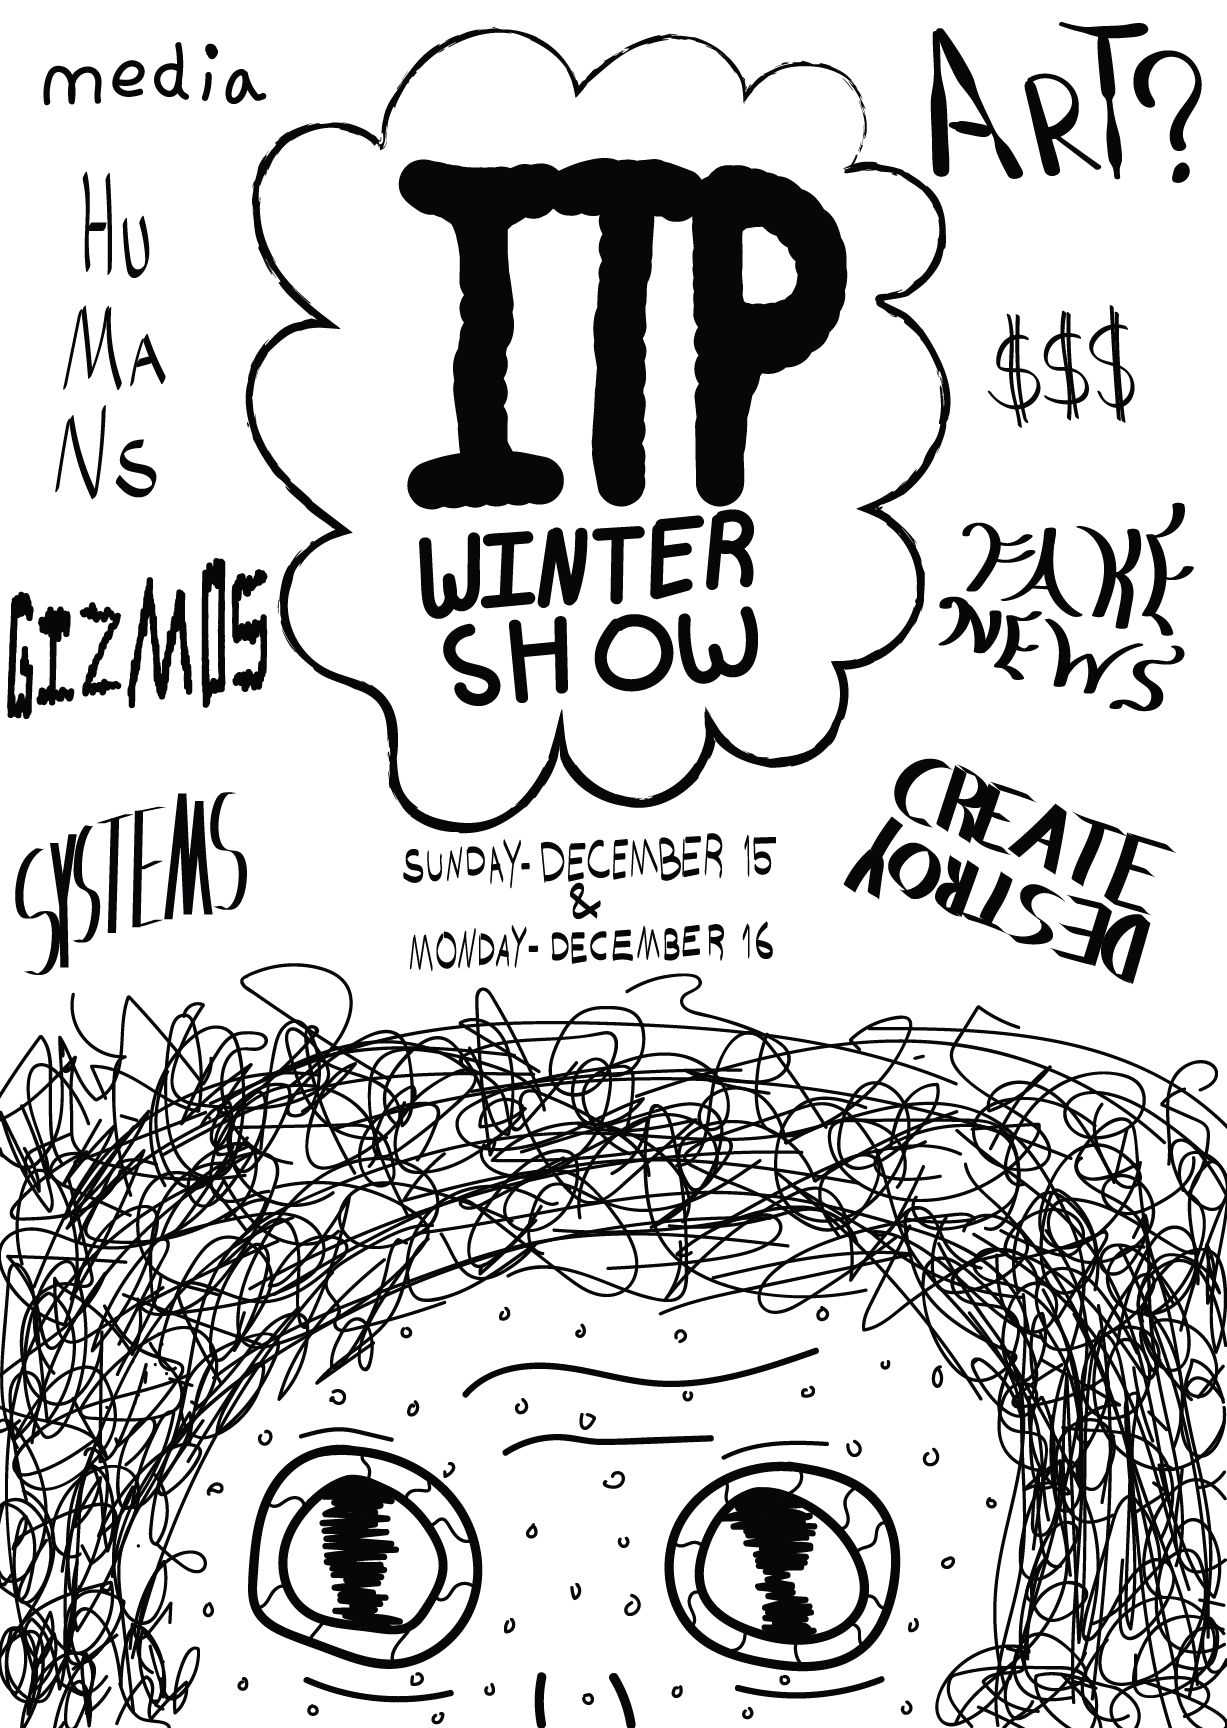 ITP Winter Show poster idea. Hand-drawn look, in black and white. Bottom third contains face, close up. Eyes look bewlidered. Above is a thought cloud that sys 'ITP Winter Show'. It is surrounded by words saying, counter clockwise from the top left: 'media', 'humans', 'gizmos', 'systems', 'art?, '$$$', 'fake news', and 'create/destroy'.